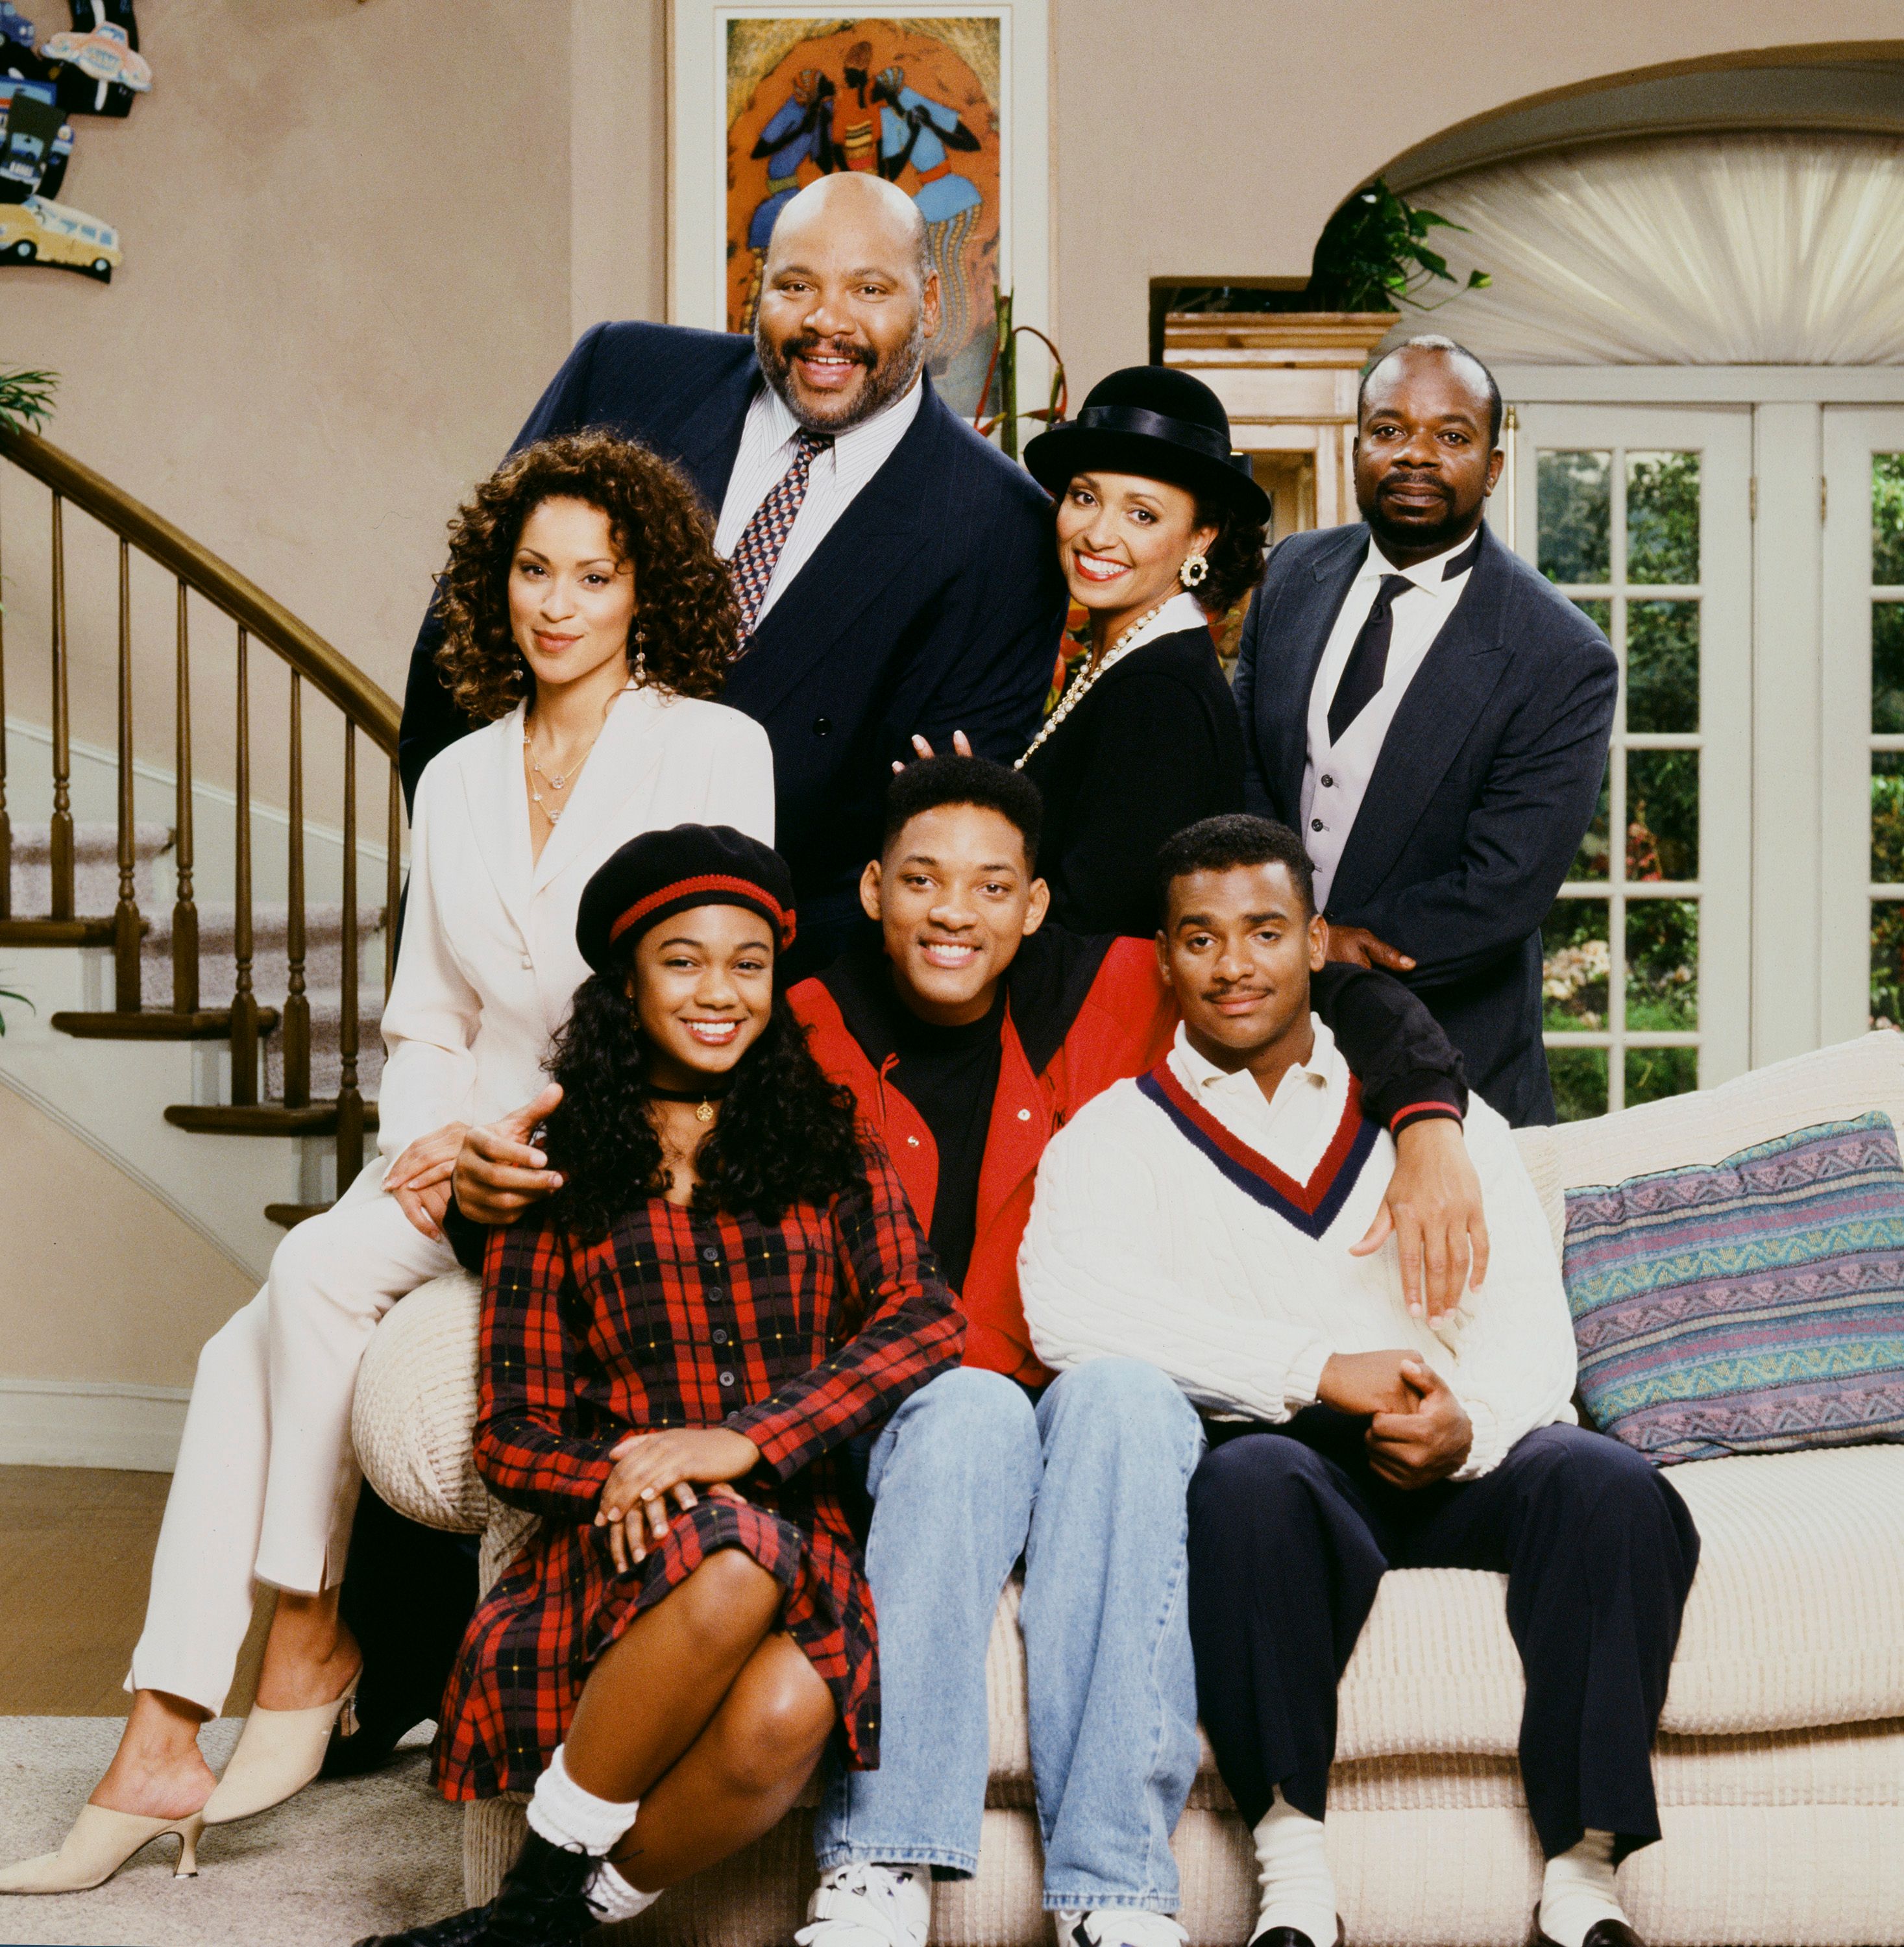 Karyn Parsons as Hilary Banks, James Avery as Philip Banks, Daphne Reid as Vivian Banks, Joseph Marcell as Geoffrey; Front: Tatyana Ali as Ashley Banks, Will Smith as William 'Will' Smith, Alfonso Ribeiro as Carlton Banks on "The Fresh Prince of Bel Air" Season 4. | Source: Getty Images